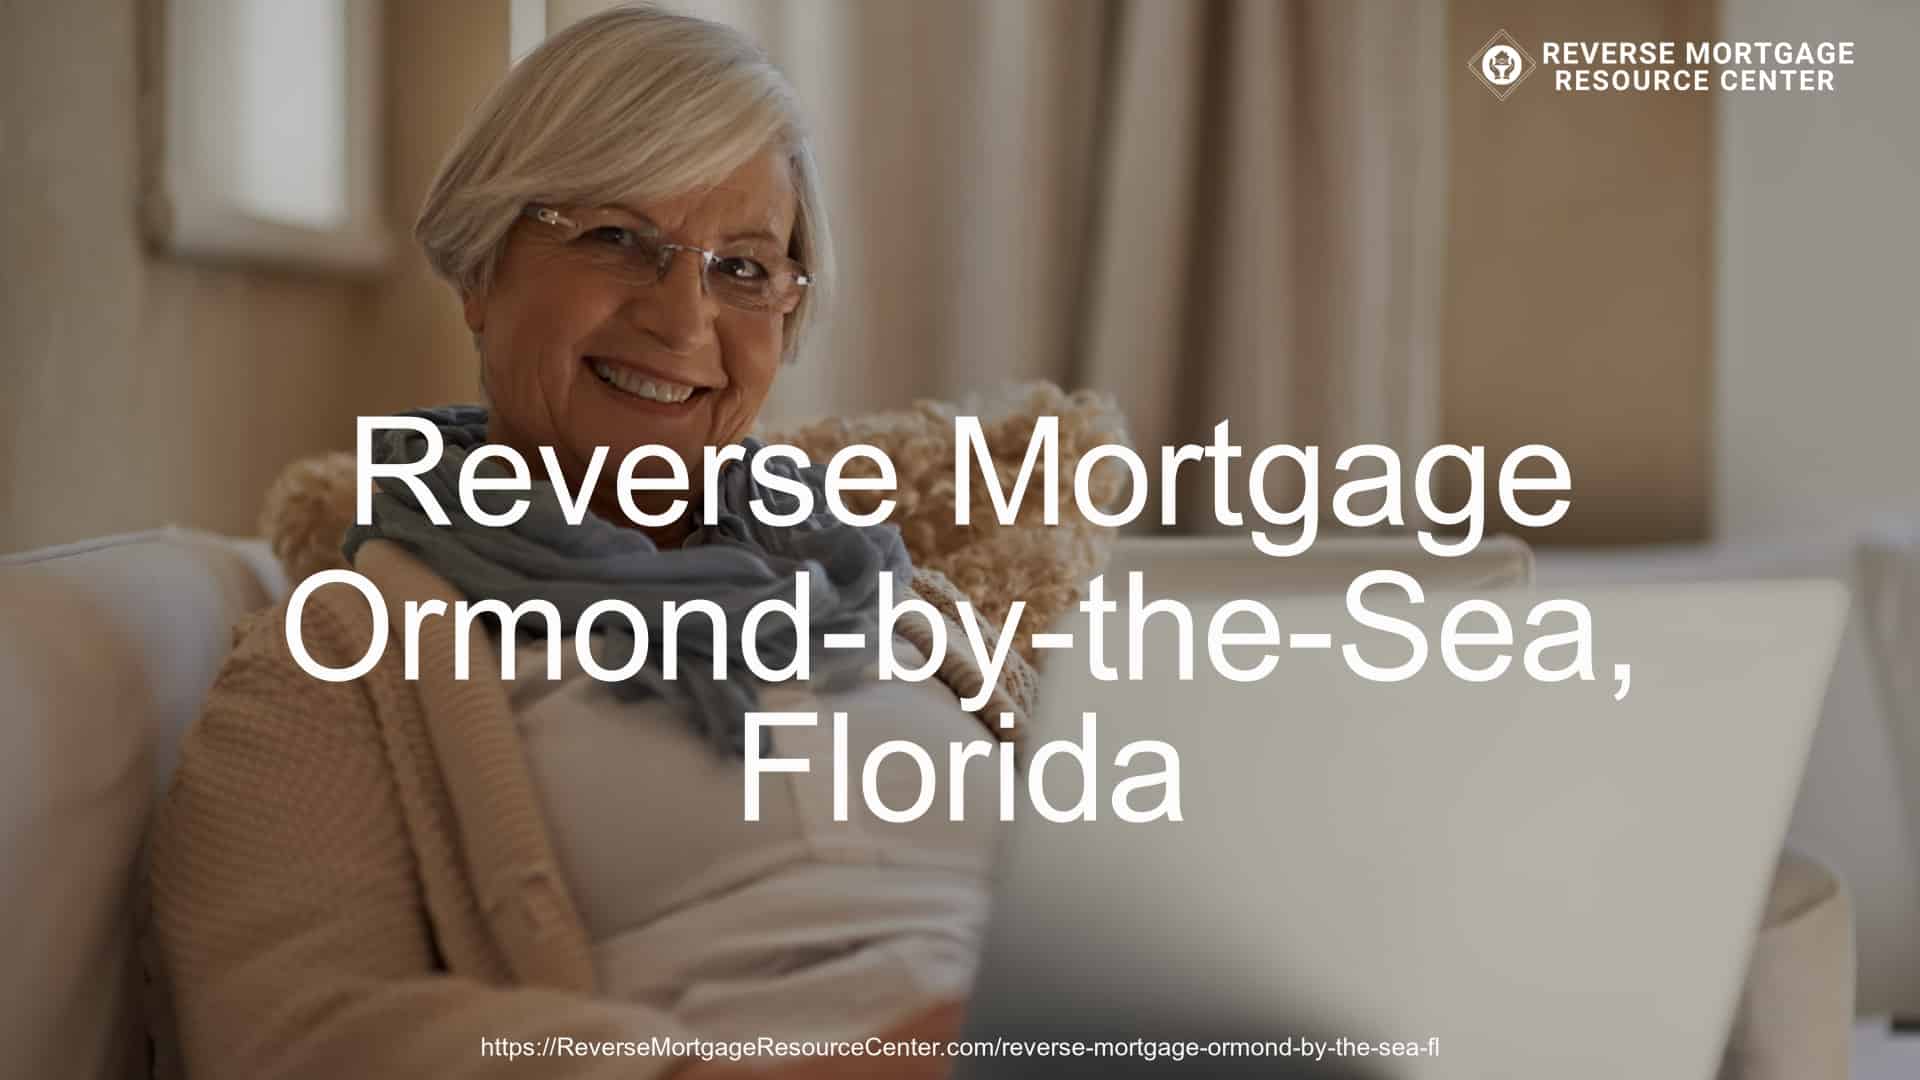 Reverse Mortgage in Ormond-by-the-Sea, FL